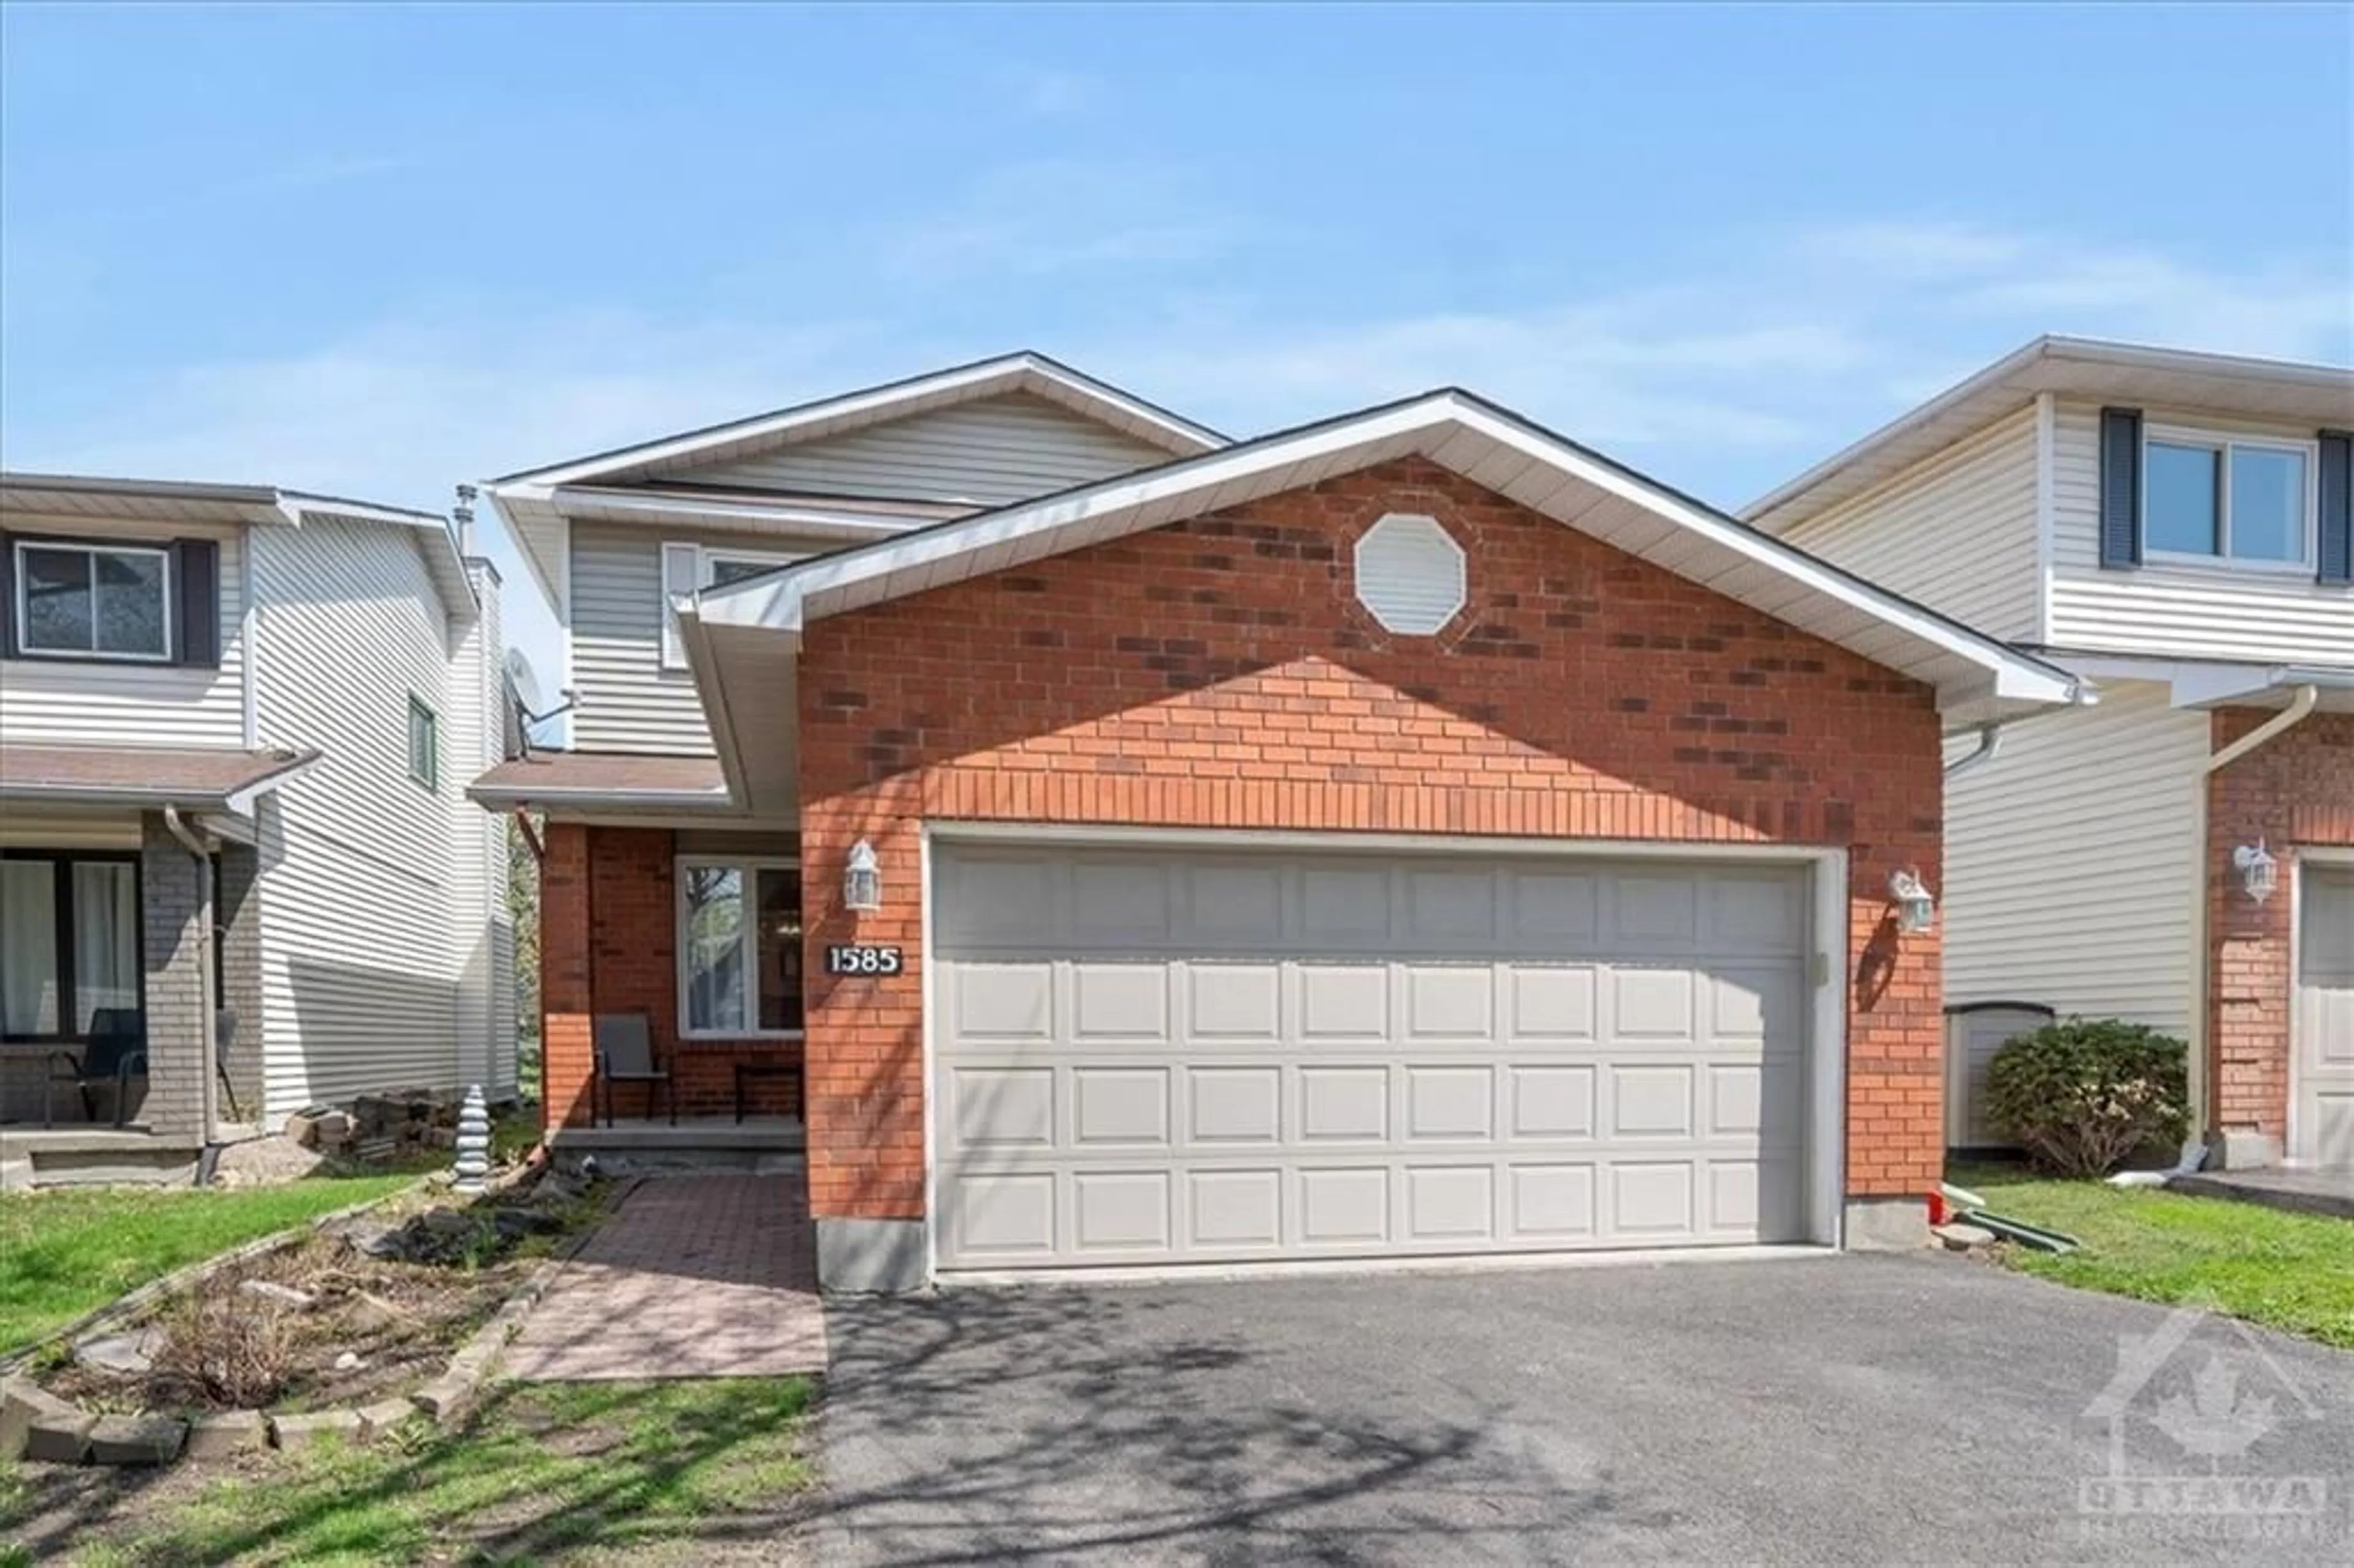 Home with brick exterior material for 1585 MONTCERF Crt, Ottawa Ontario K1C 4Z6